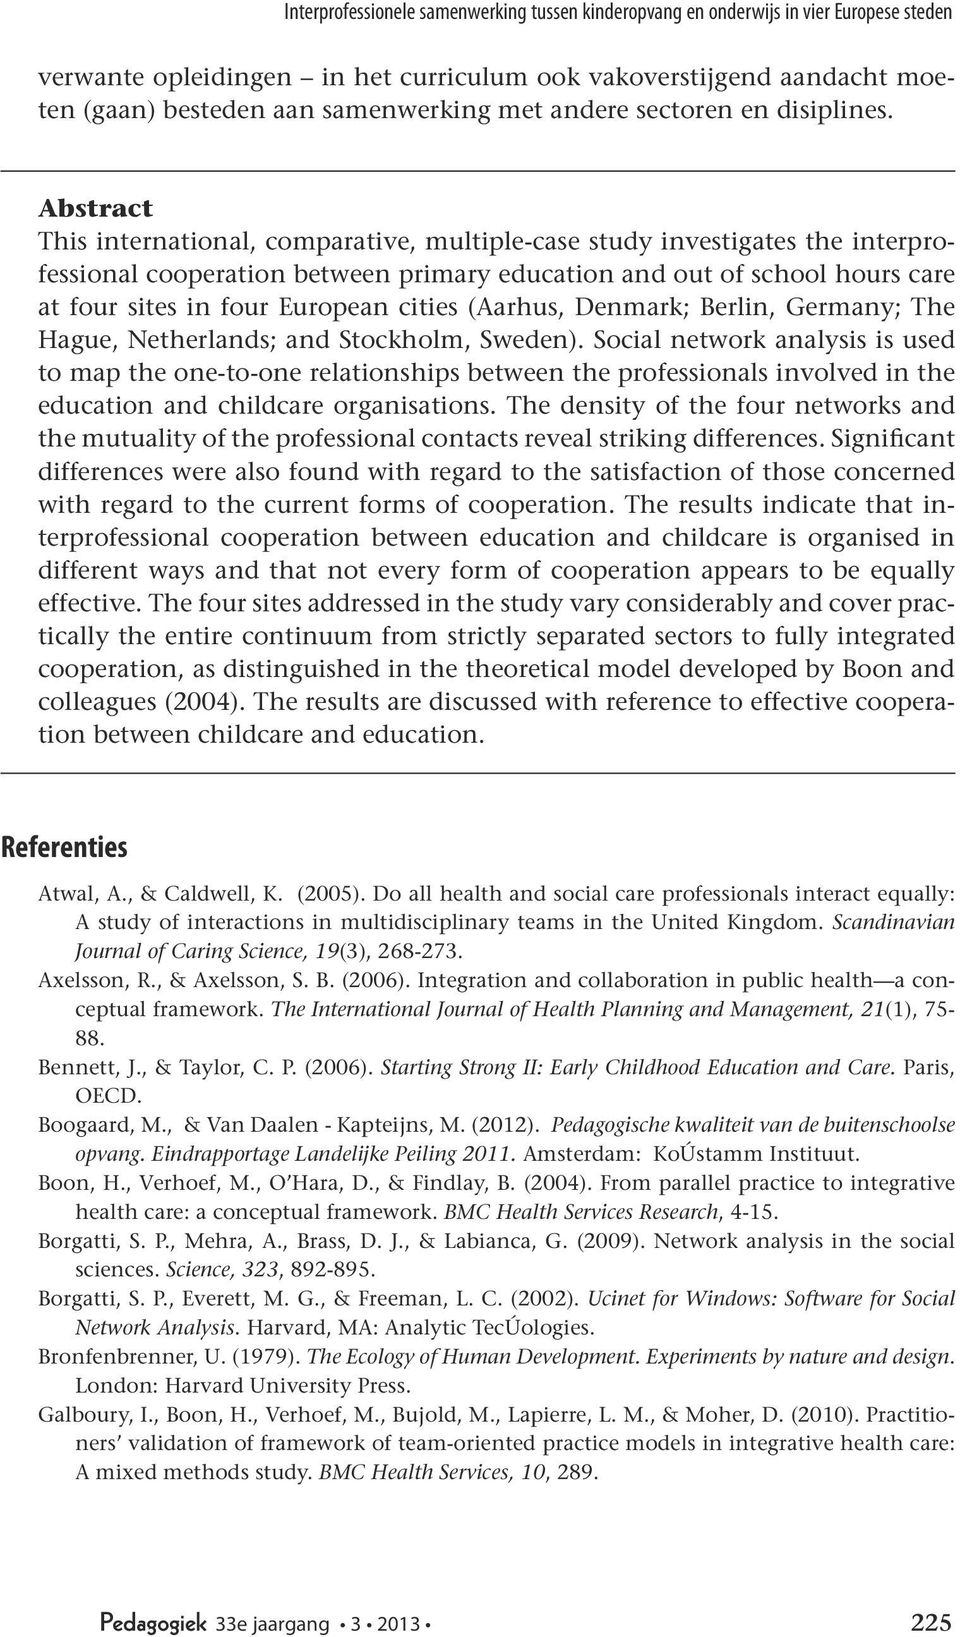 Abstract This international, comparative, multiple-case study investigates the interprofessional cooperation between primary education and out of school hours care at four sites in four European